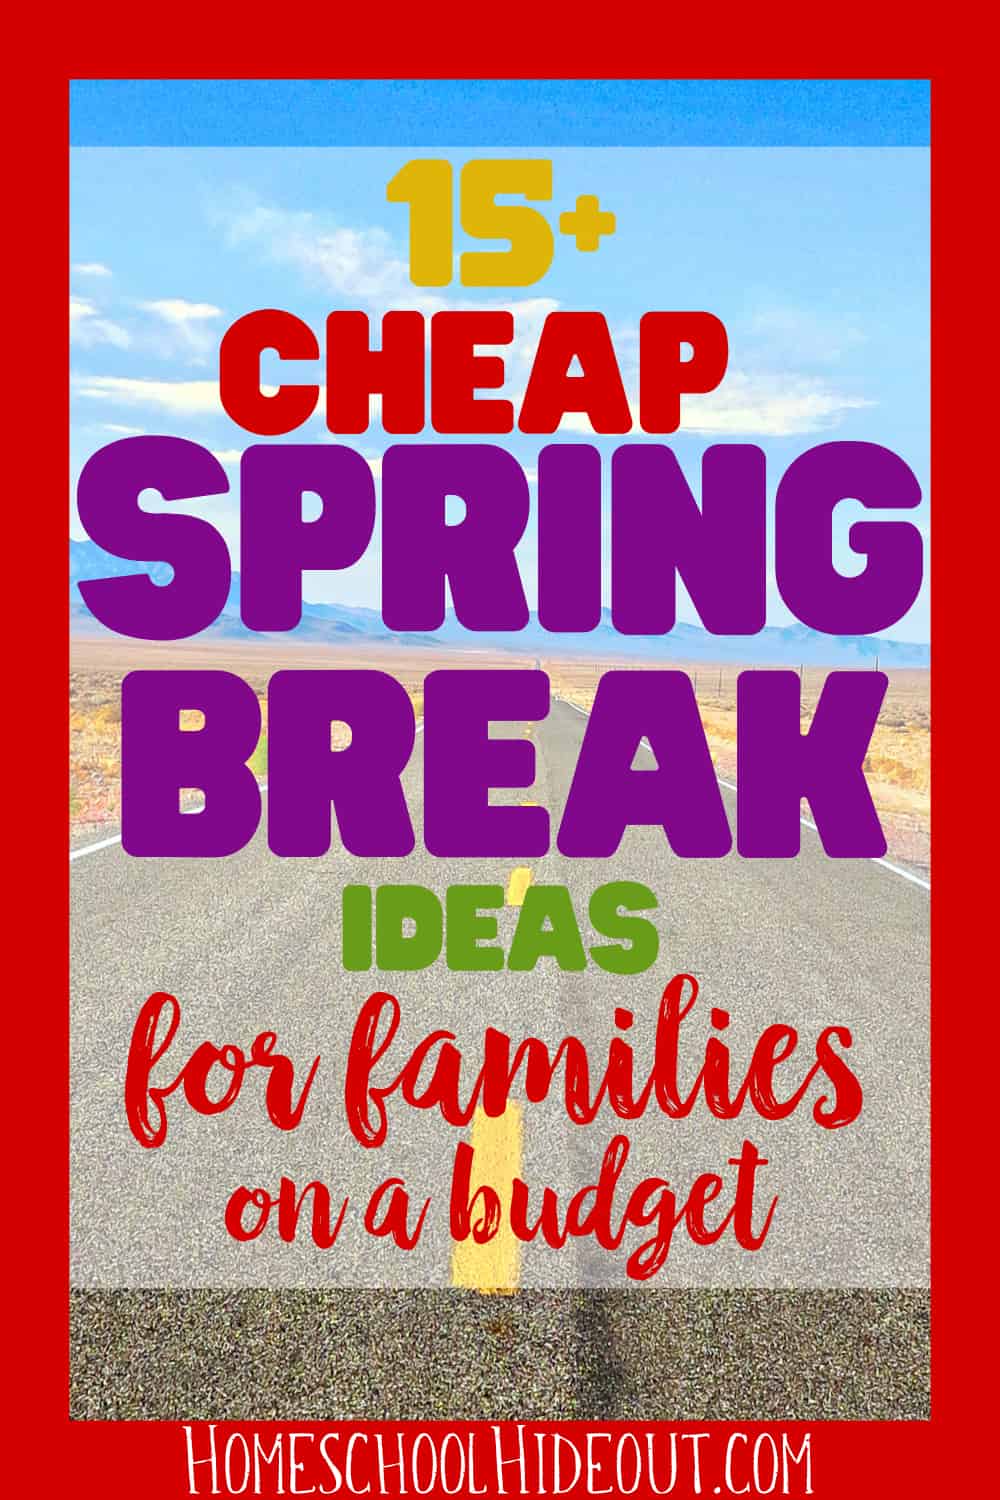 Looking for cheap spring break ideas for families? These ideas are perfect for making memories while not breaking the bank! #springbreak #familytime #vacationonabudget #cheapvacation